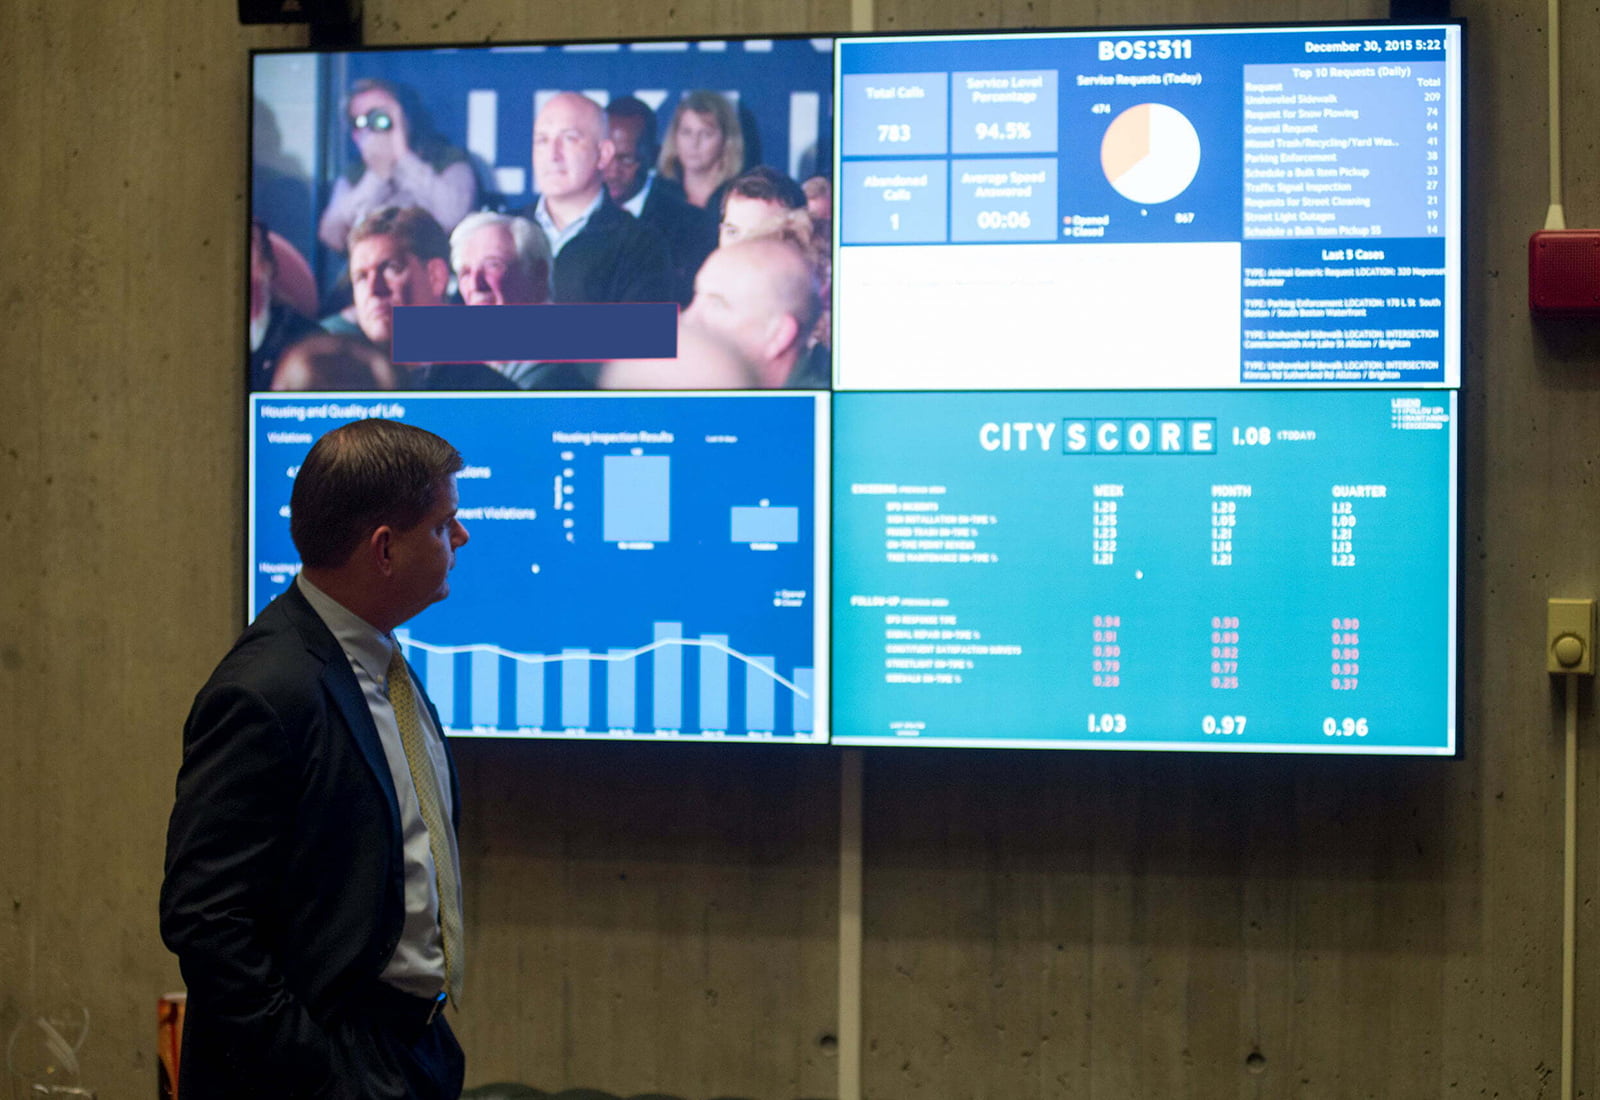 Mayor Marty Walsh examines Boston's 311 and City Score dashboard data. Through What Works Cities, the City of Boston focused on structuring and managing contracts to deliver better results, bringing greater accountability to how public funds are spent. Credit: City of Boston